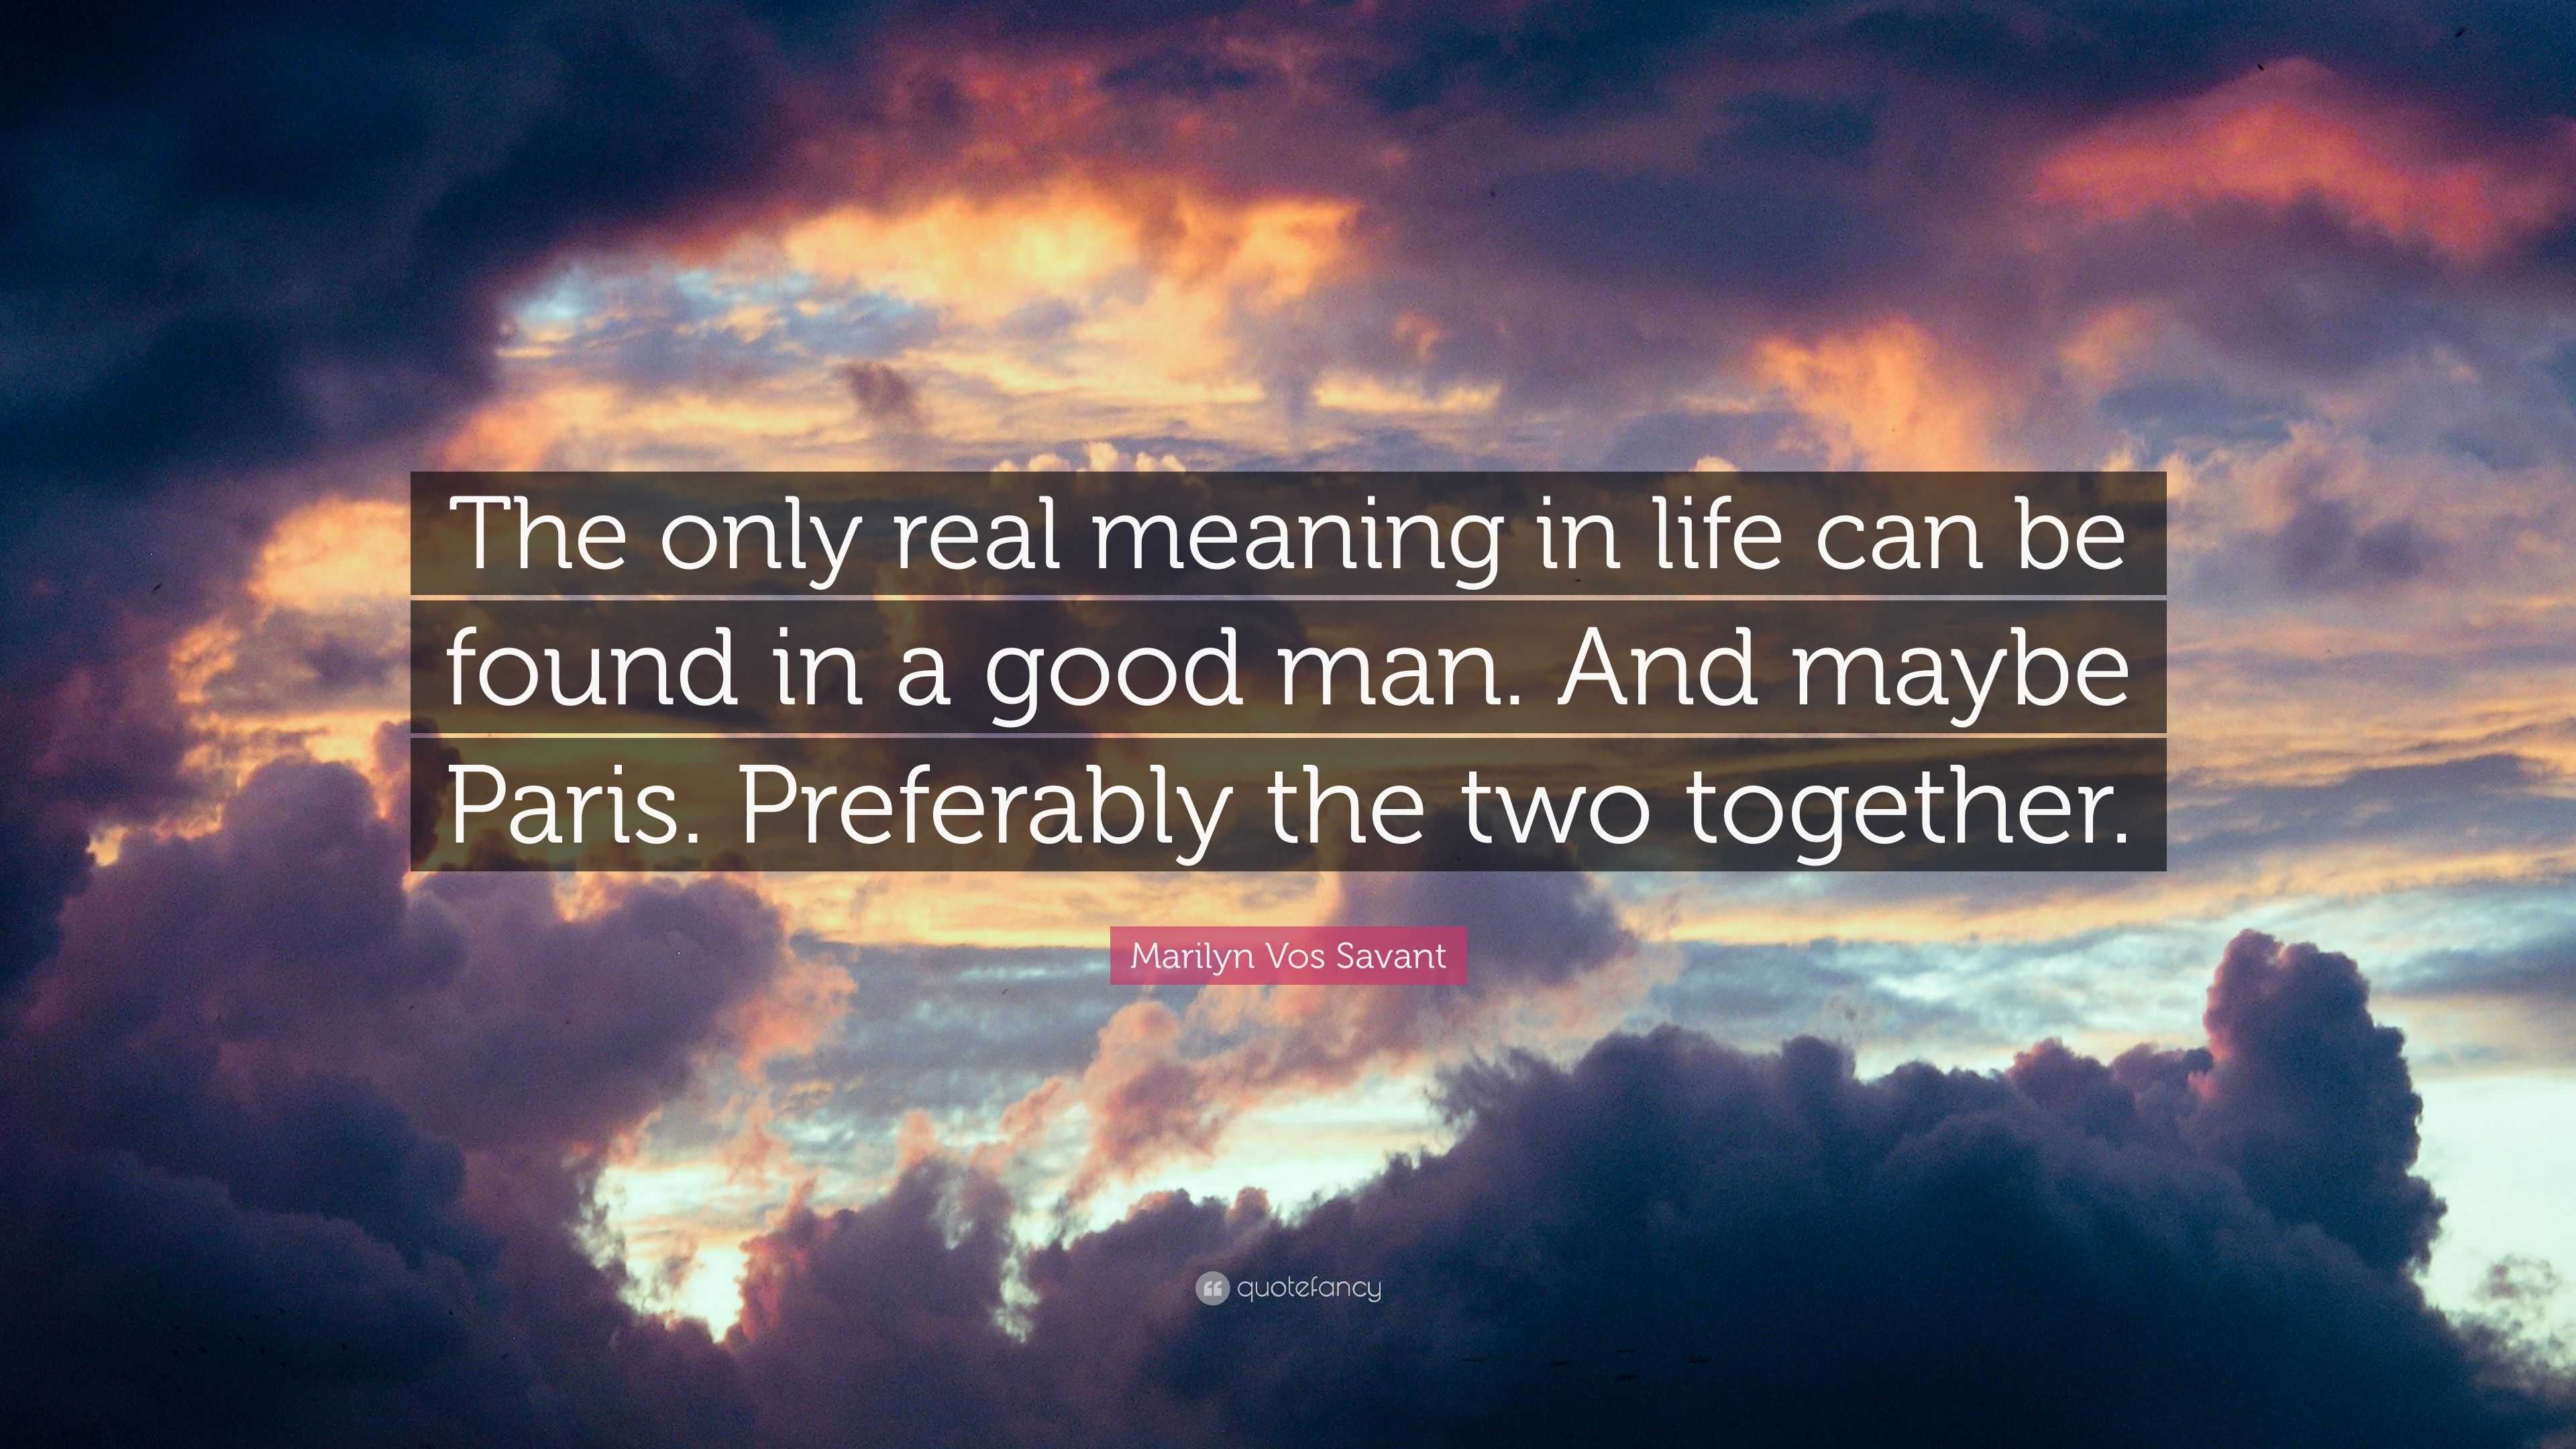 Marilyn Vos Savant Quote: “The only real meaning in life can be found ...